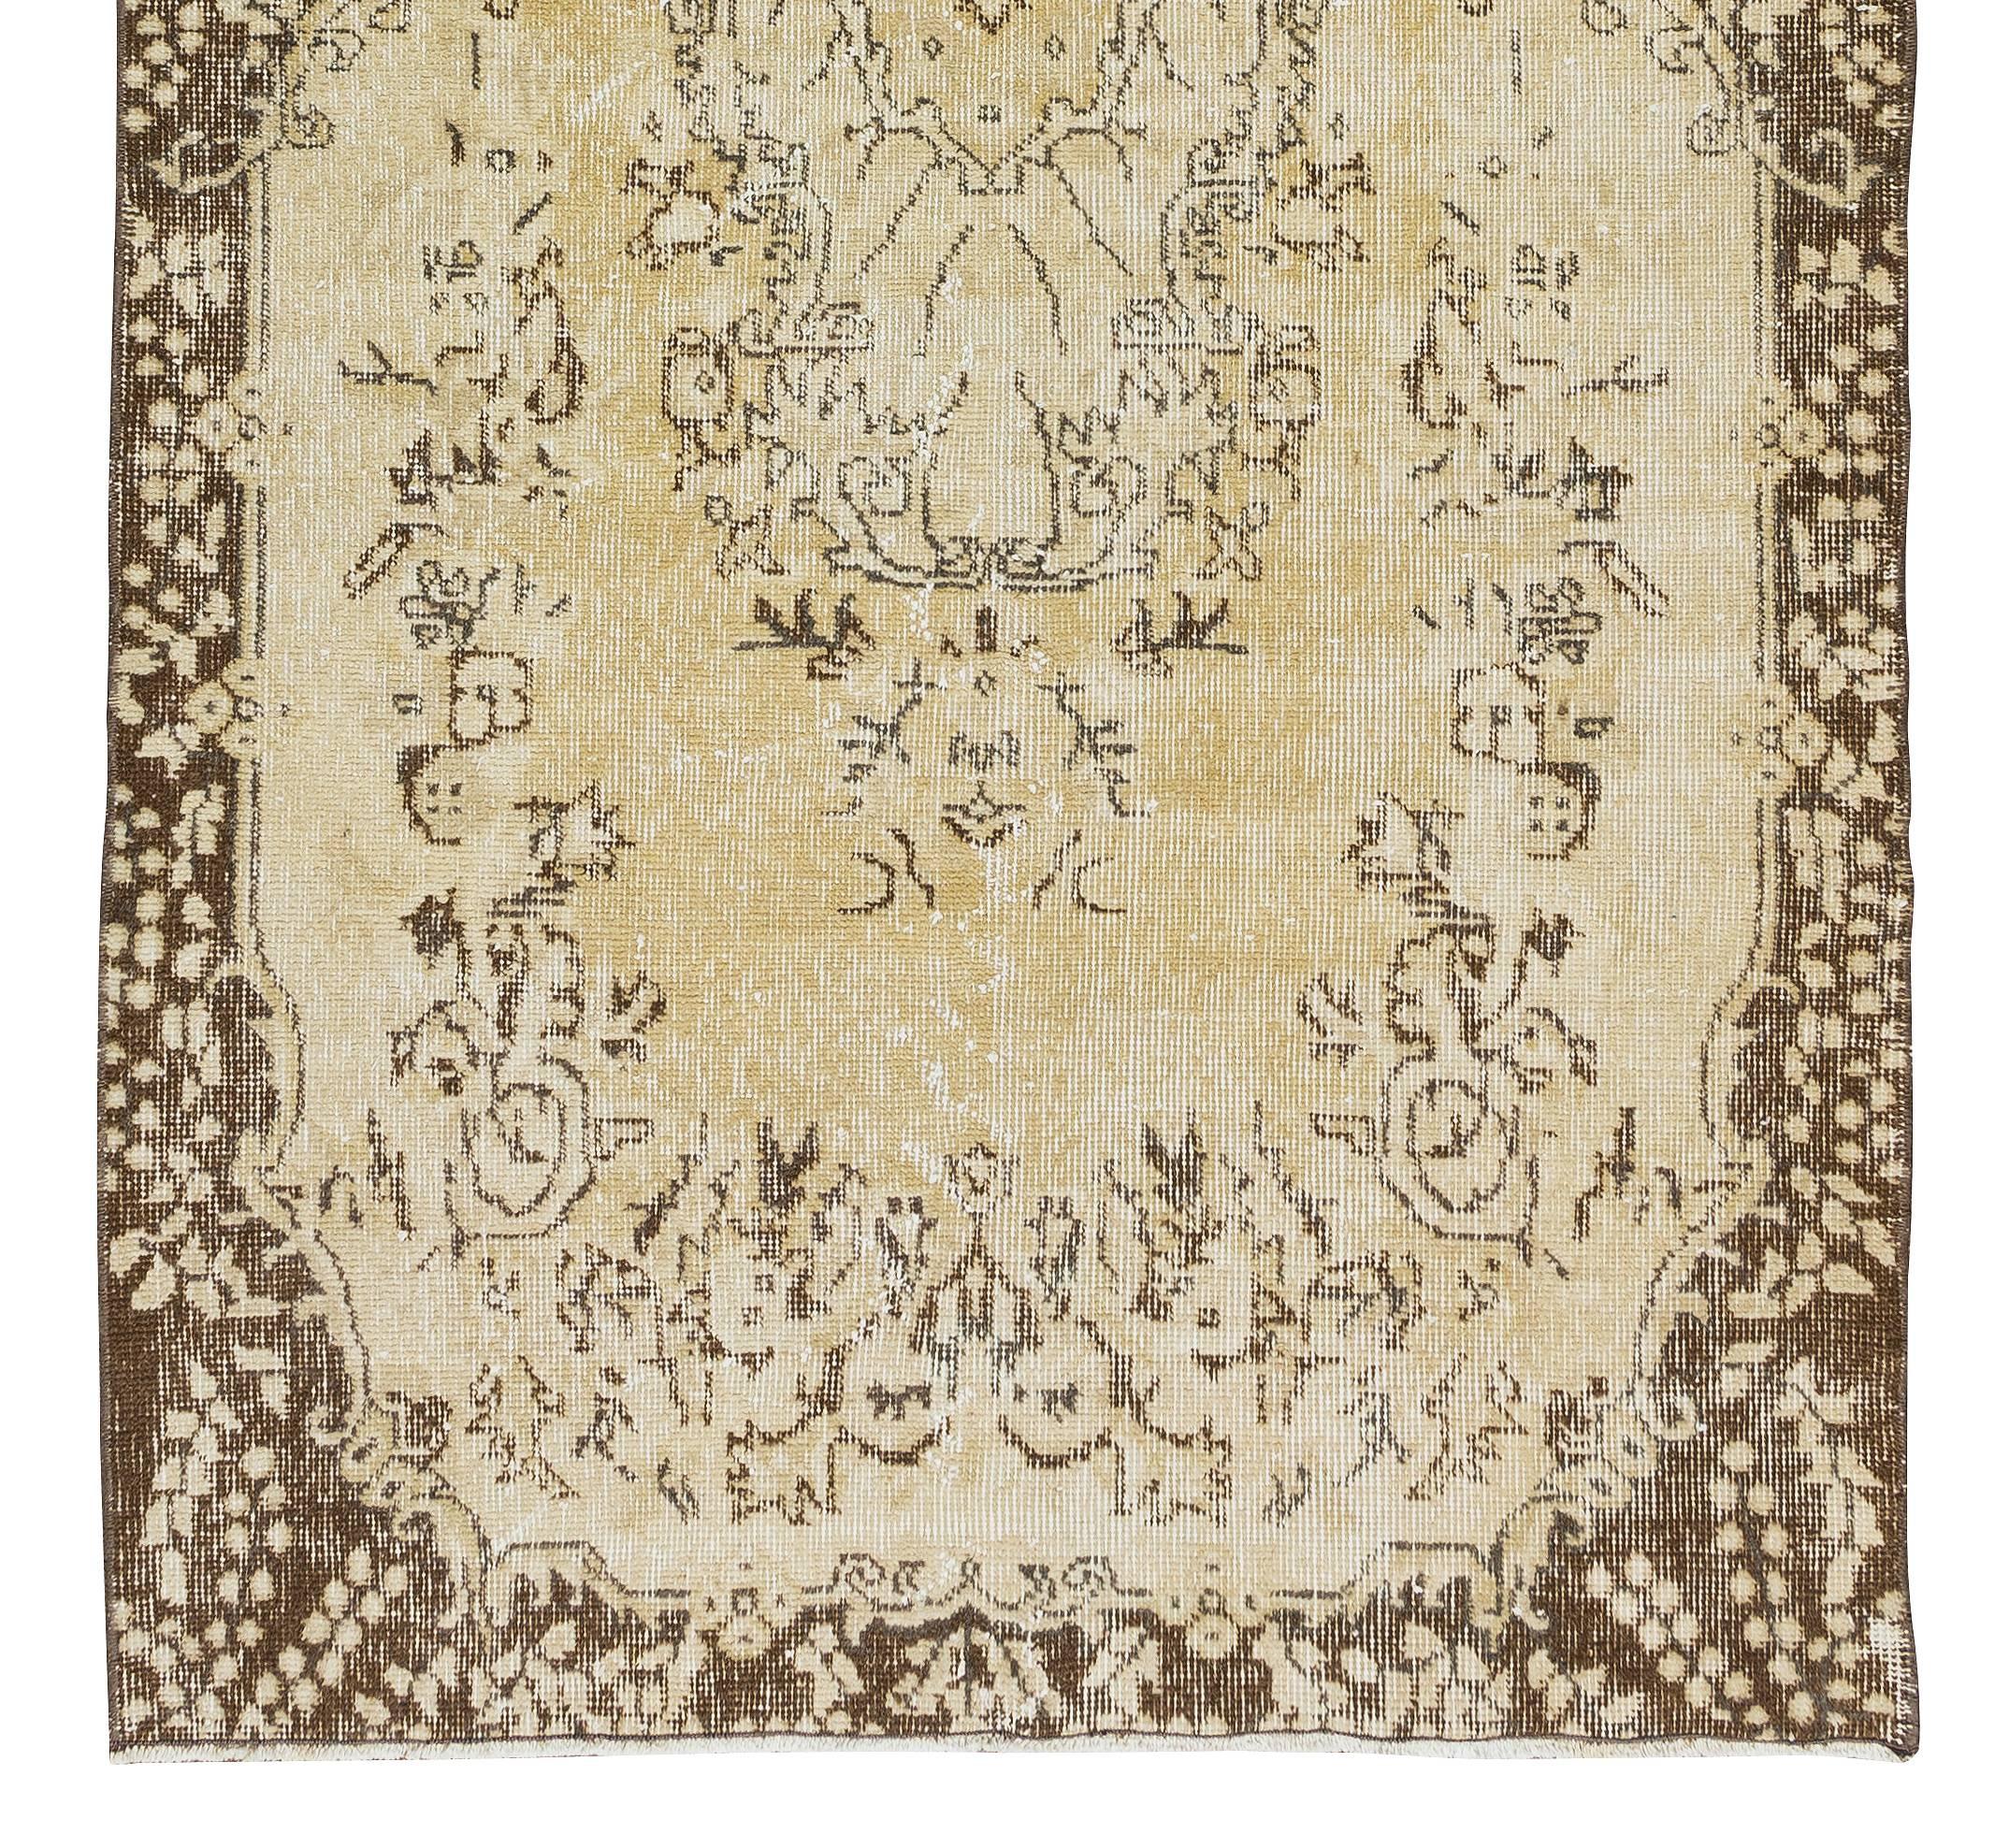 Handmade Turkish Rug, Mid-Century Baroque Design Carpet in Muted Colors In Good Condition For Sale In Philadelphia, PA